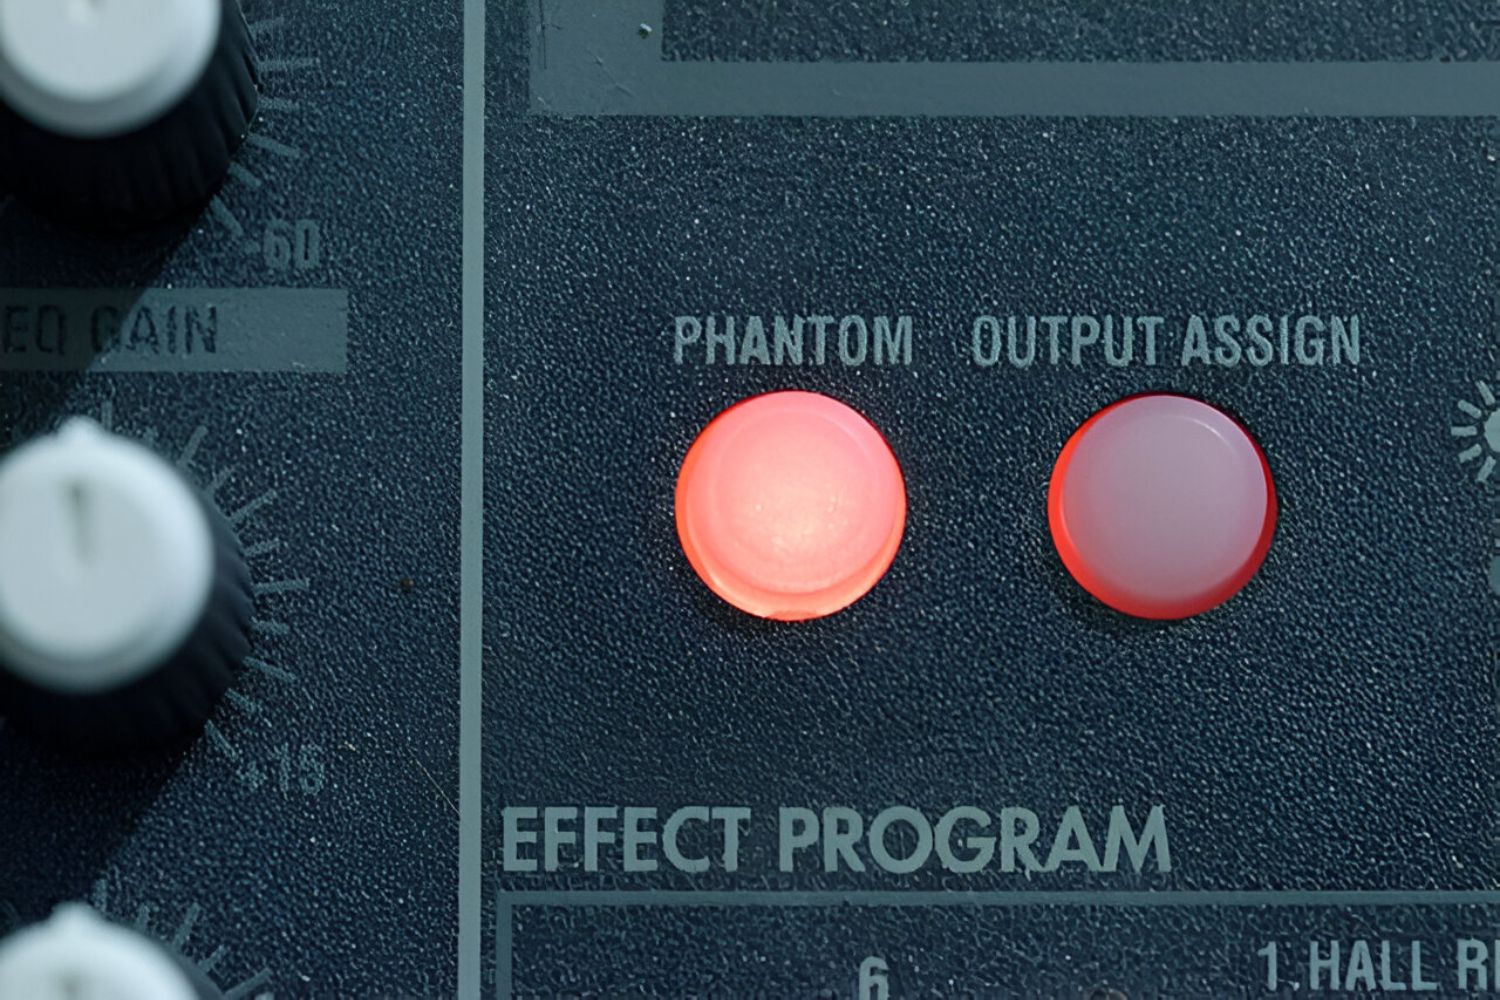 How Does The Phantom Voltage Value Affect A Condenser Microphone?